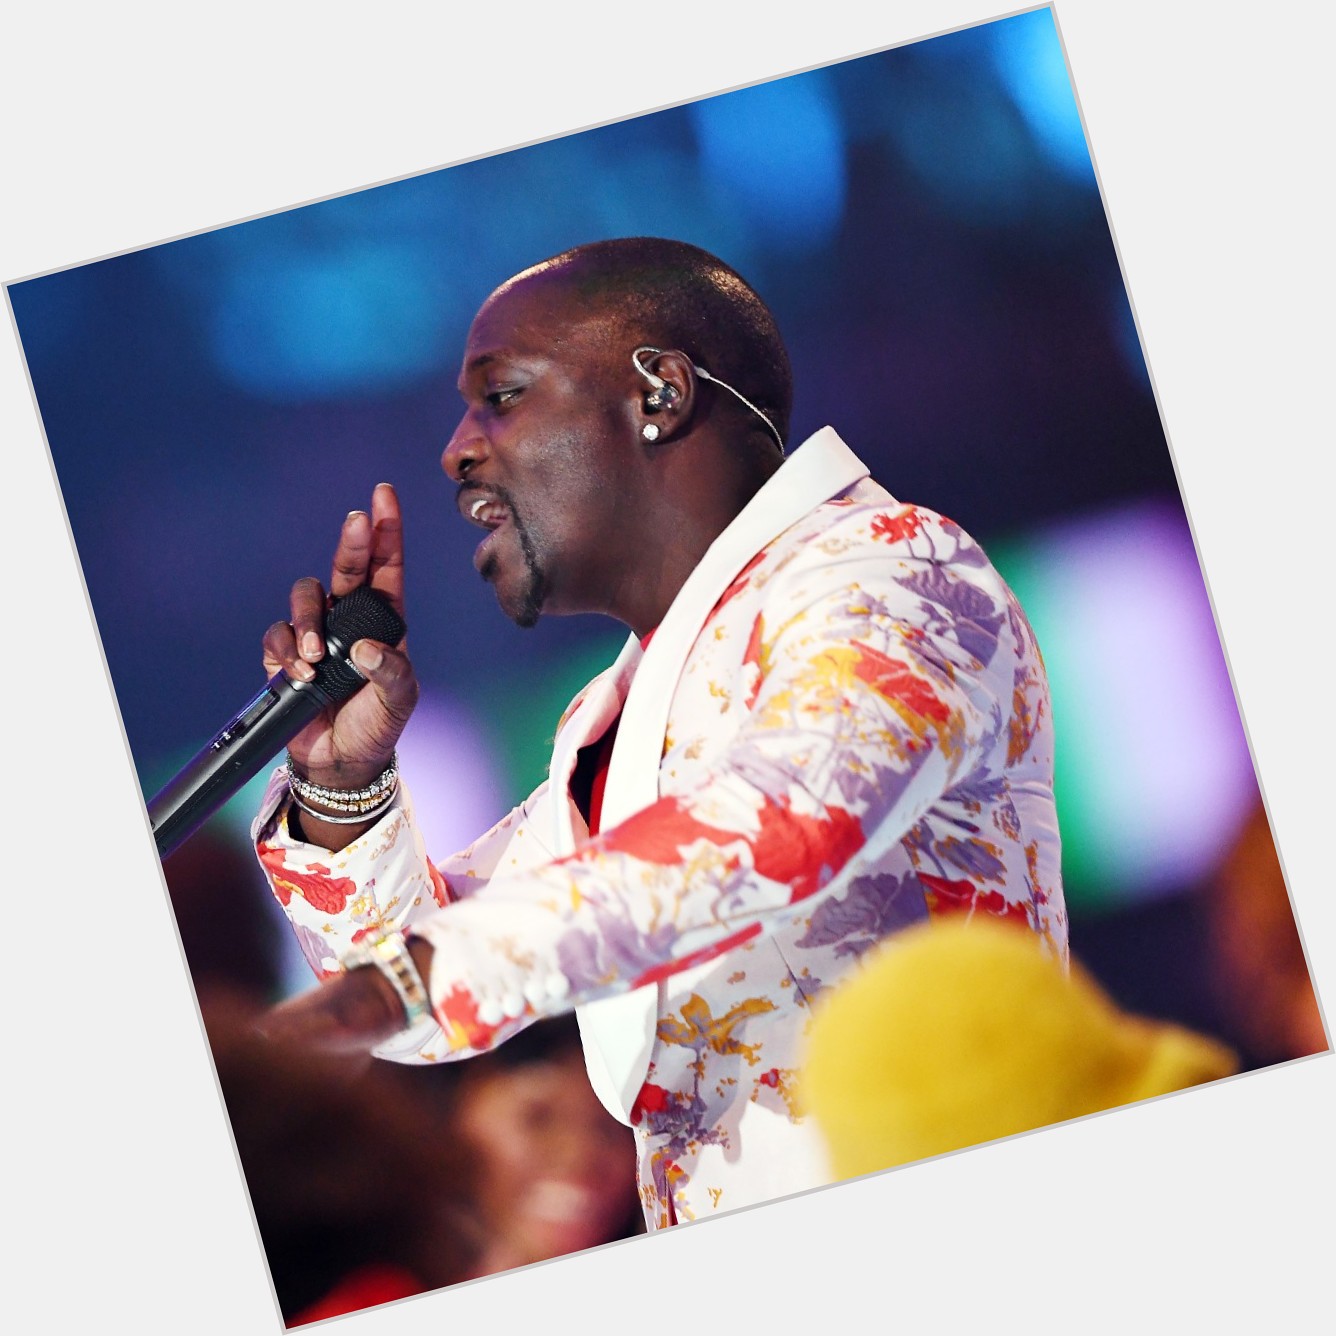 We want to wish a Happy Birthday to Akon right now, na, na.

( : Jeff Spicer via Getty Images) 